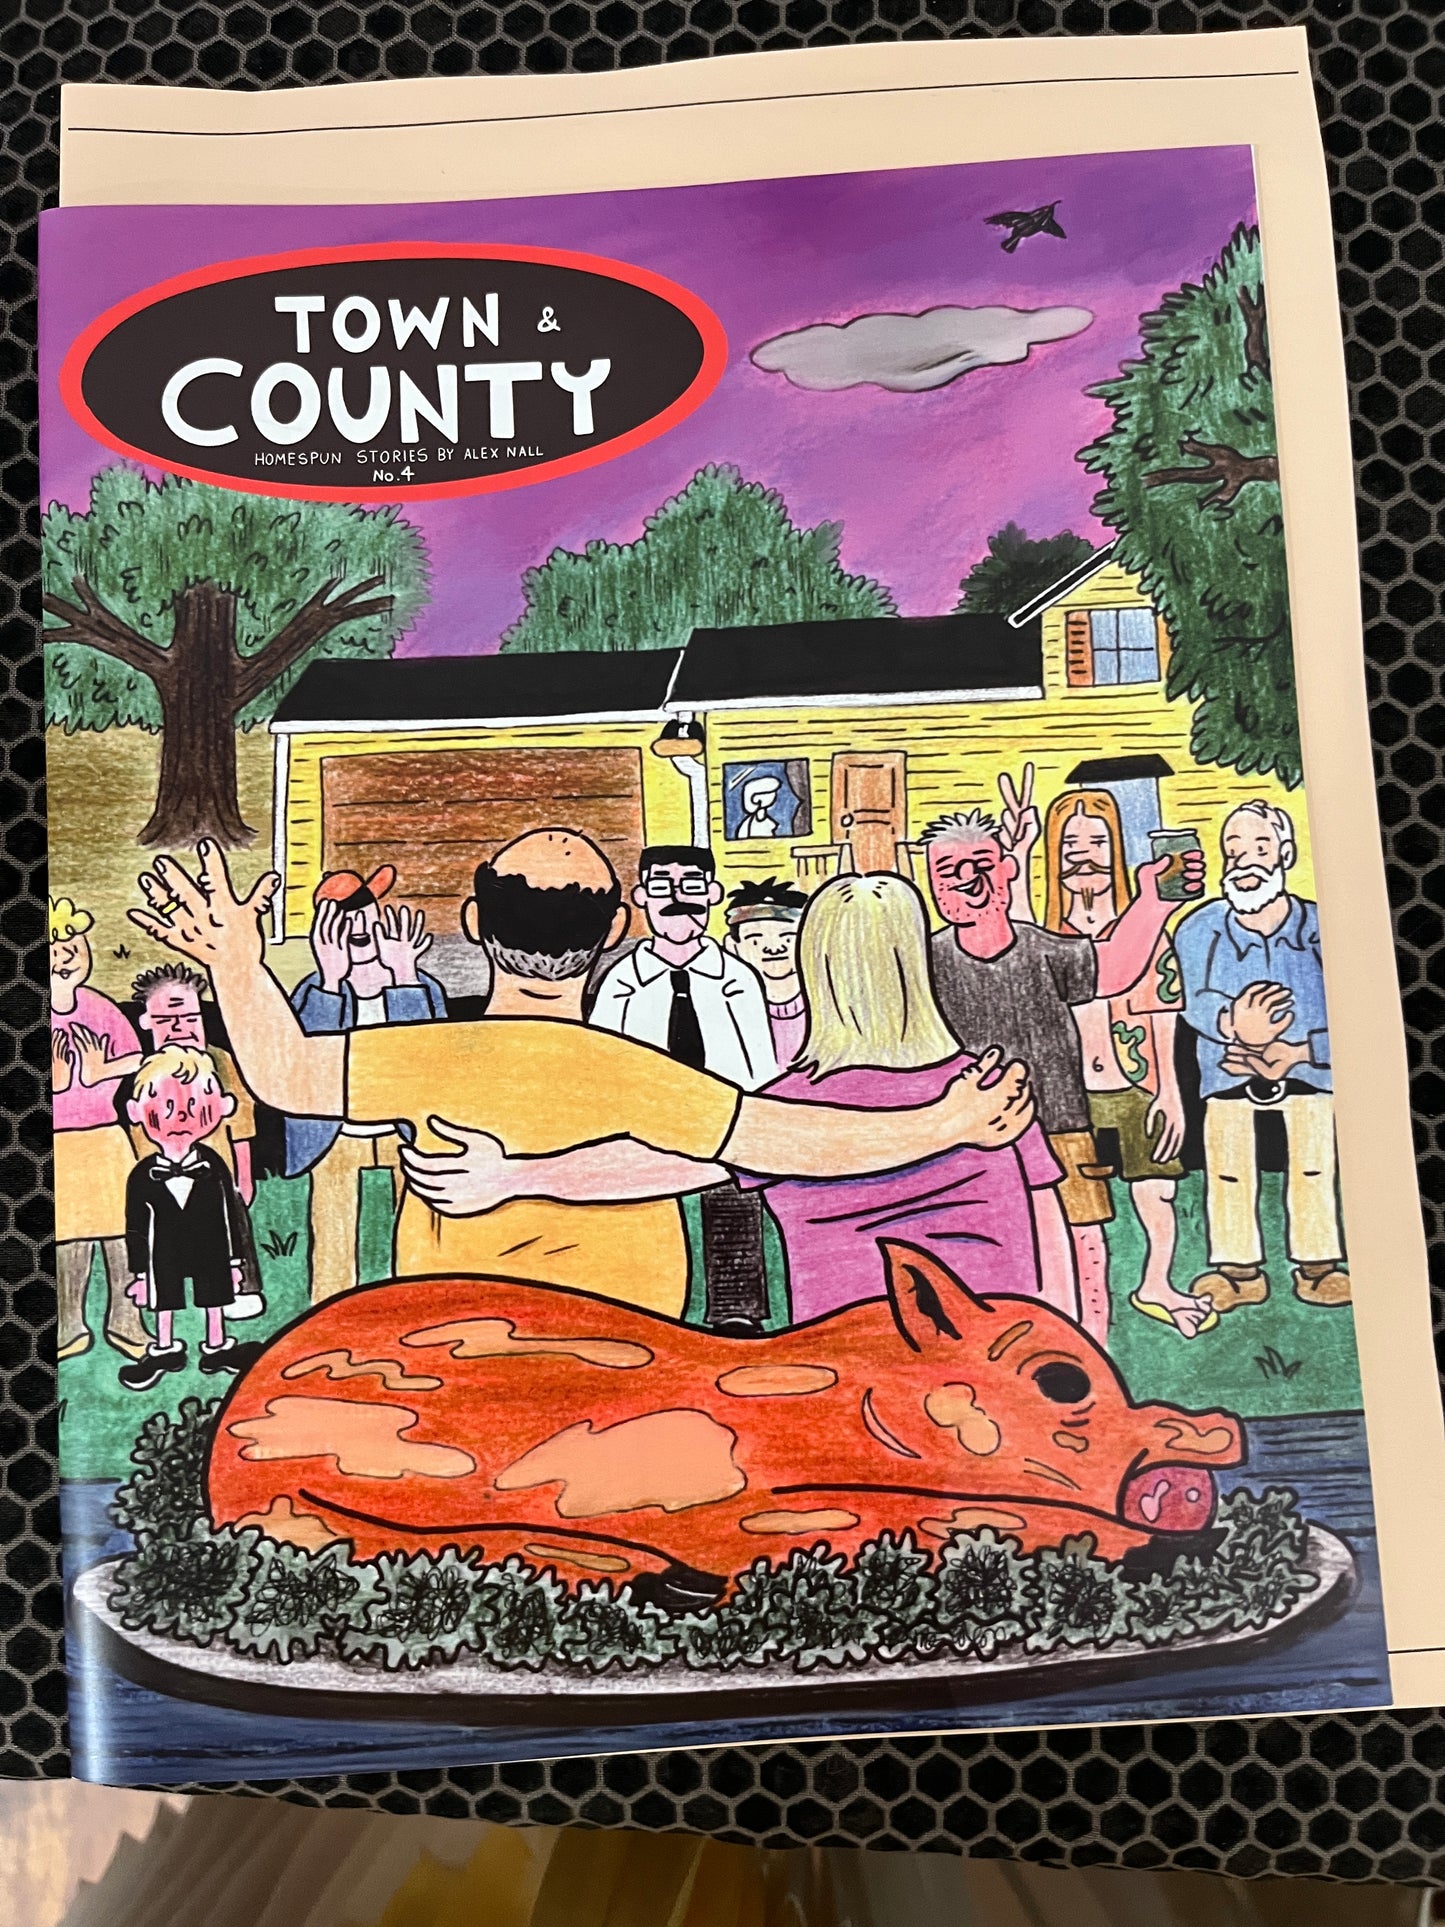 Town & Country no. 4